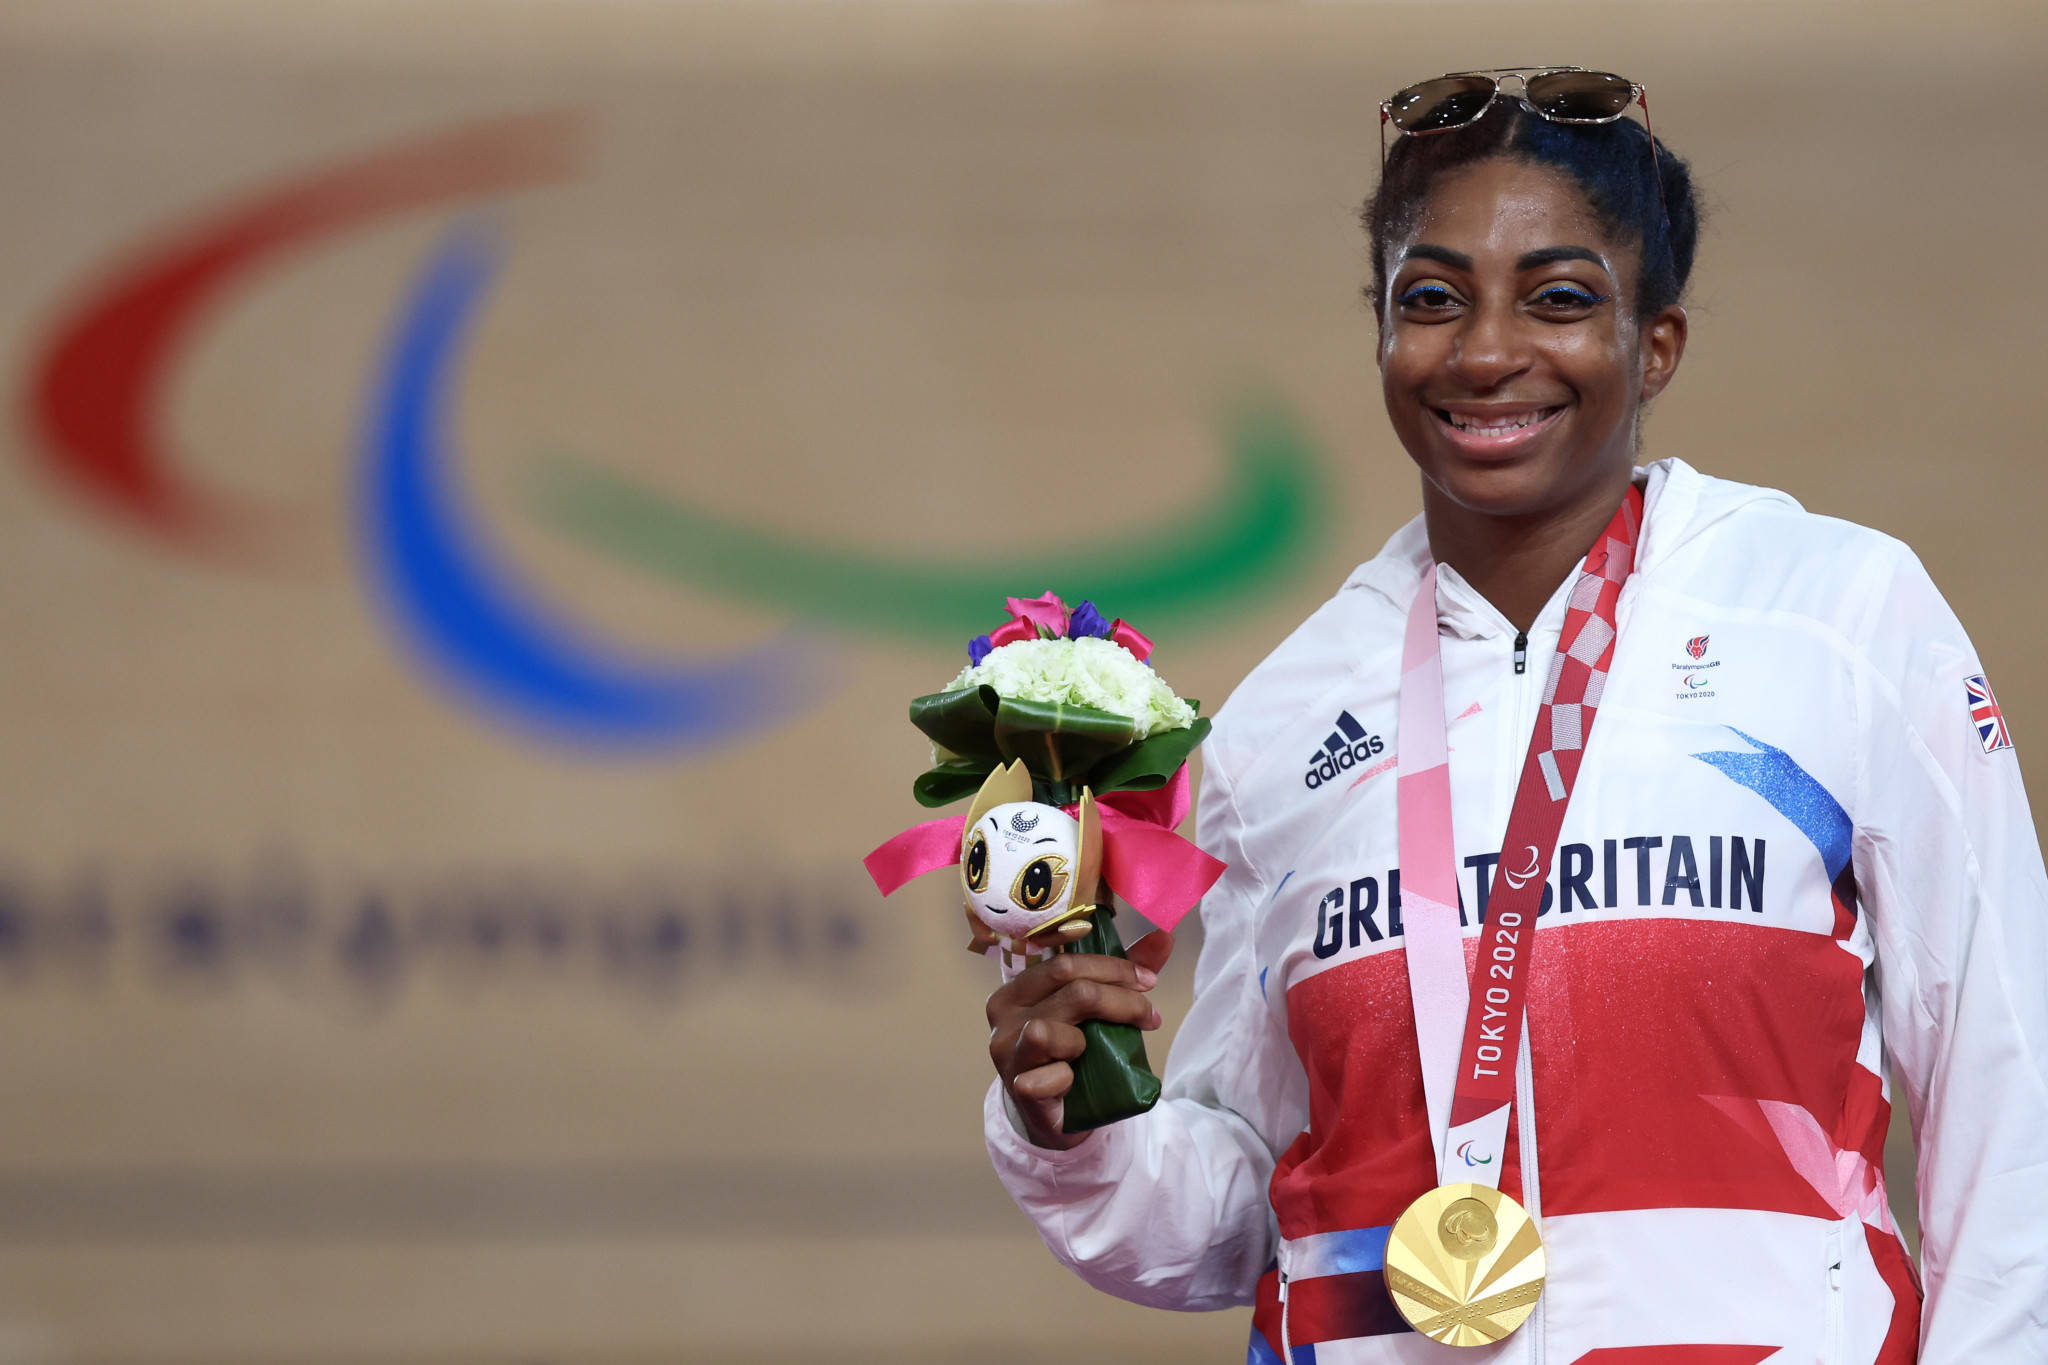 Britain's Kadeena Cox won the third Paralmypic gold medal of her career ©Getty Images